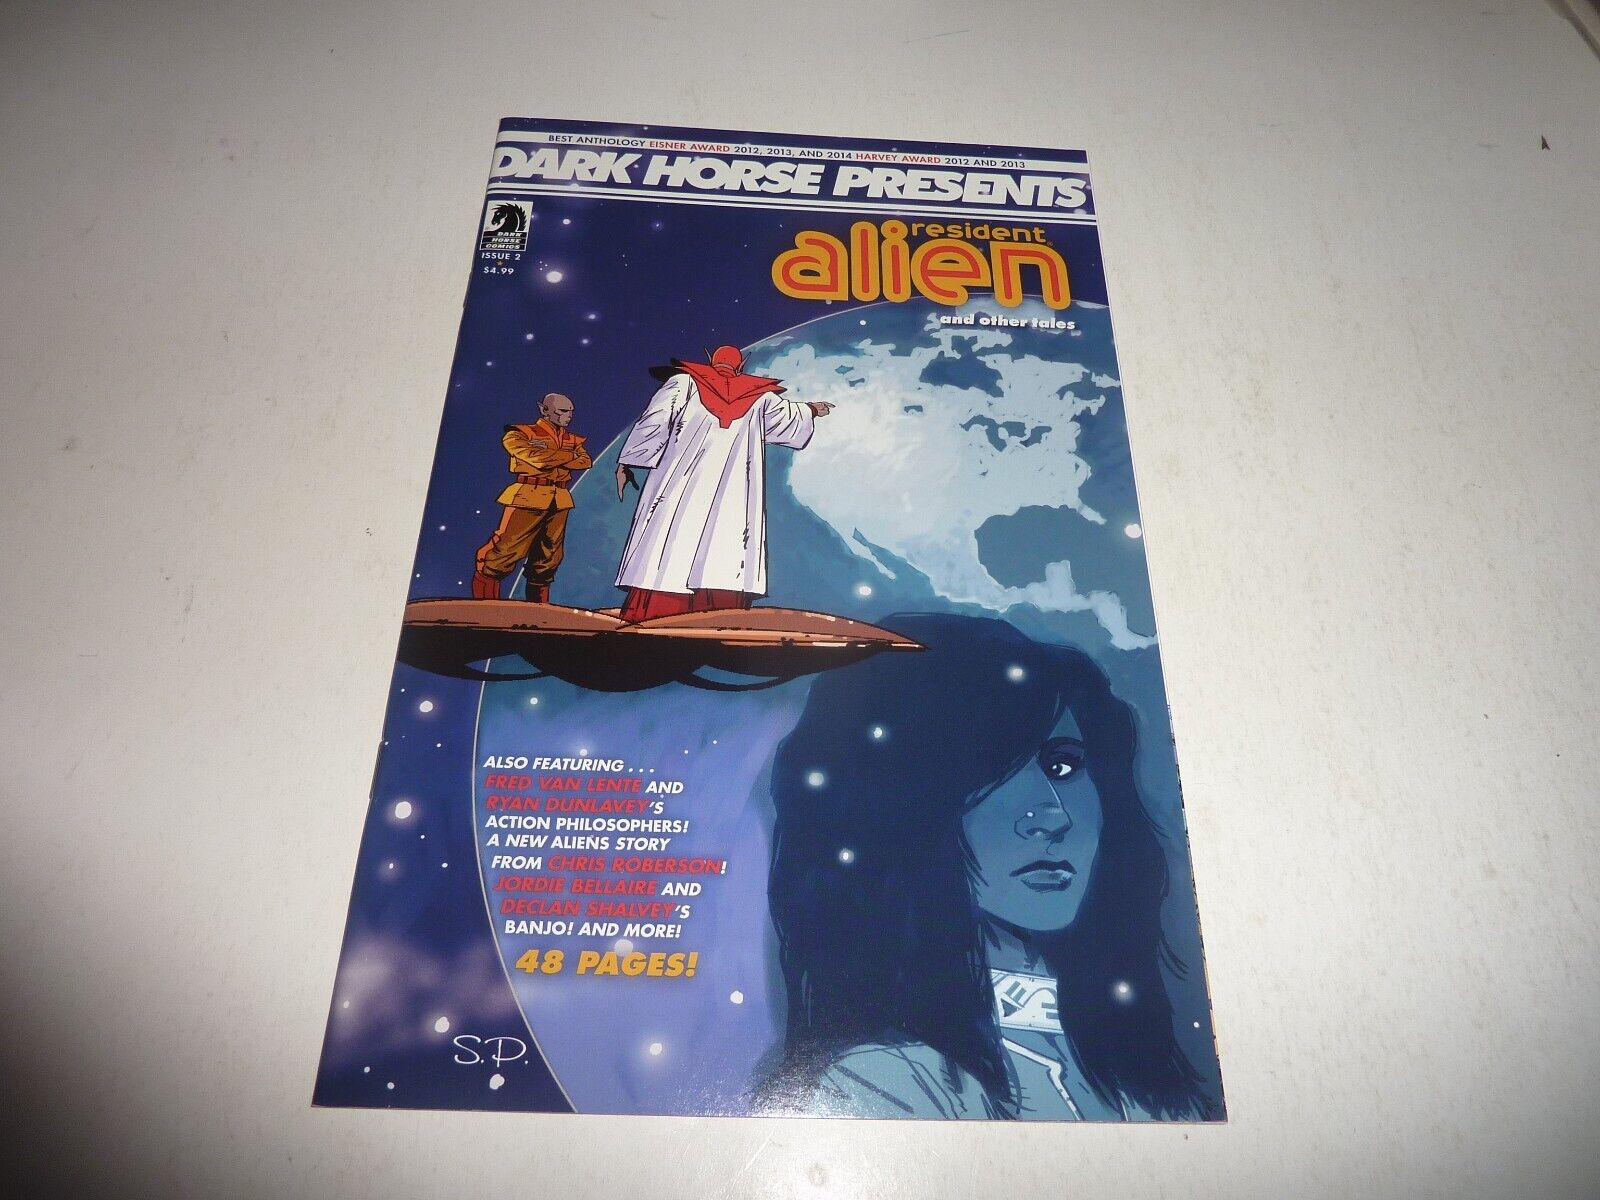 DARK HORSE PRESENTS #2 Dark Horse Comics 2014 RESIDENT ALIEN and Other Tales NM-